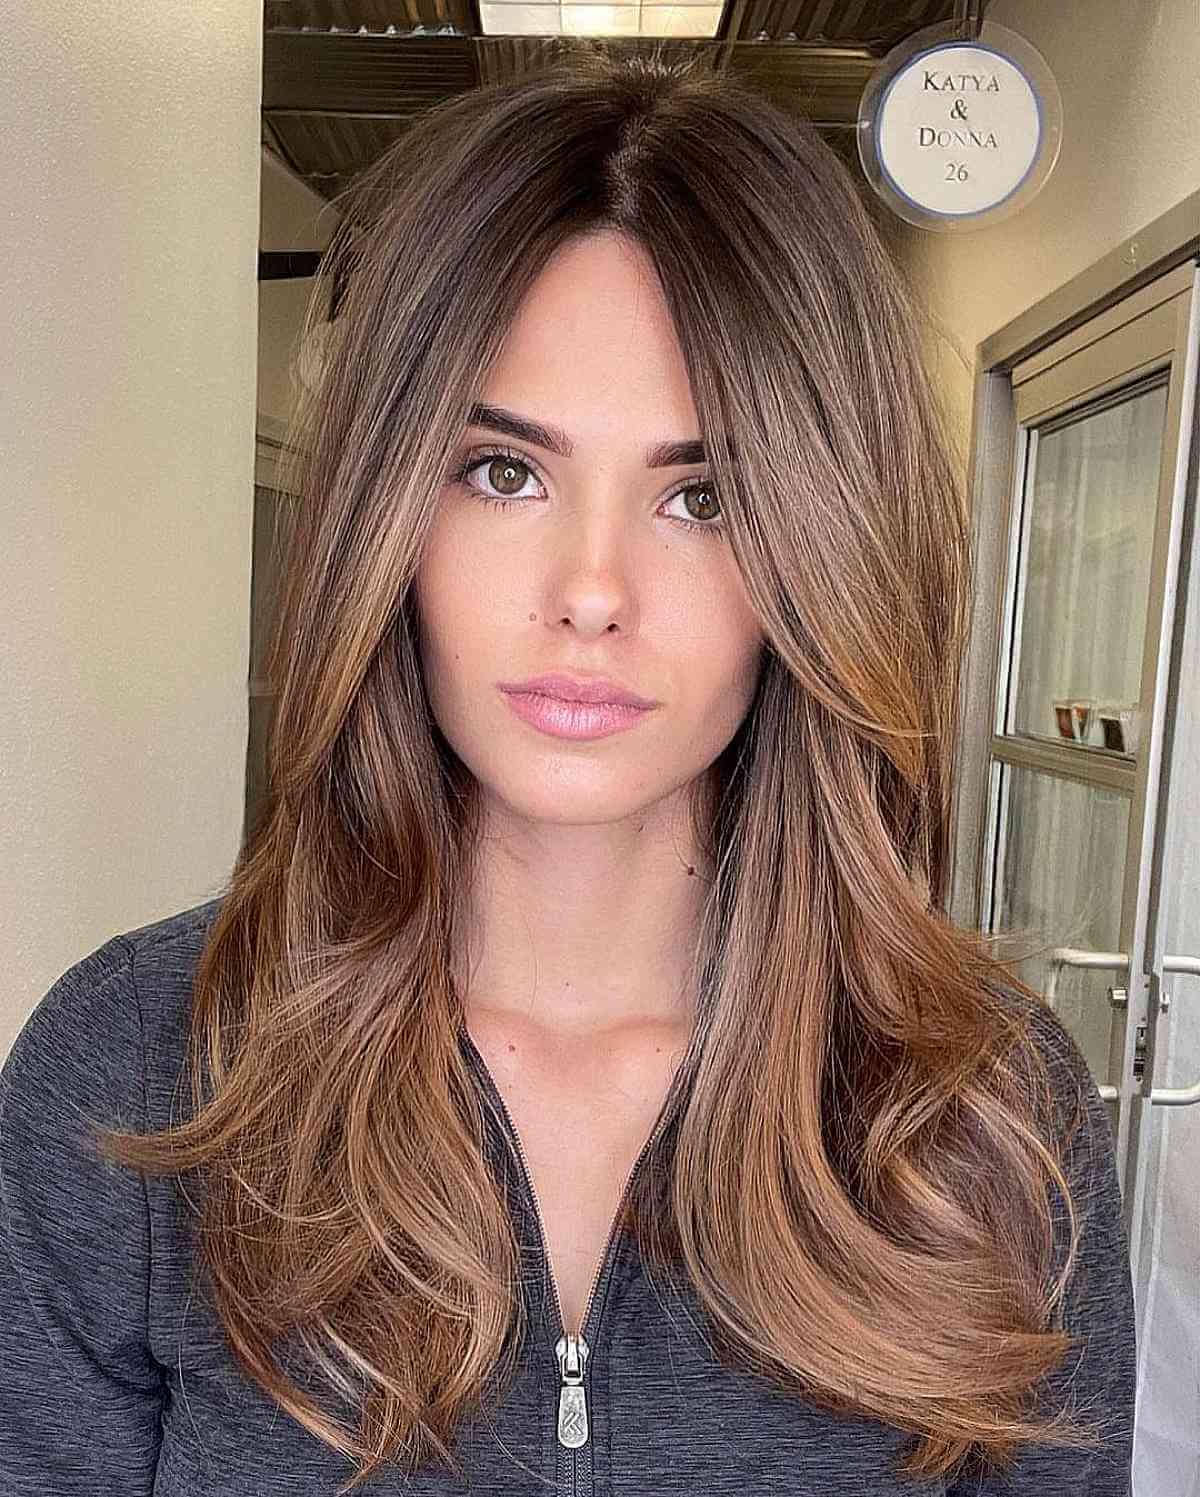 40+ Best Chocolate Brown Hair Color Ideas for Spring 2023